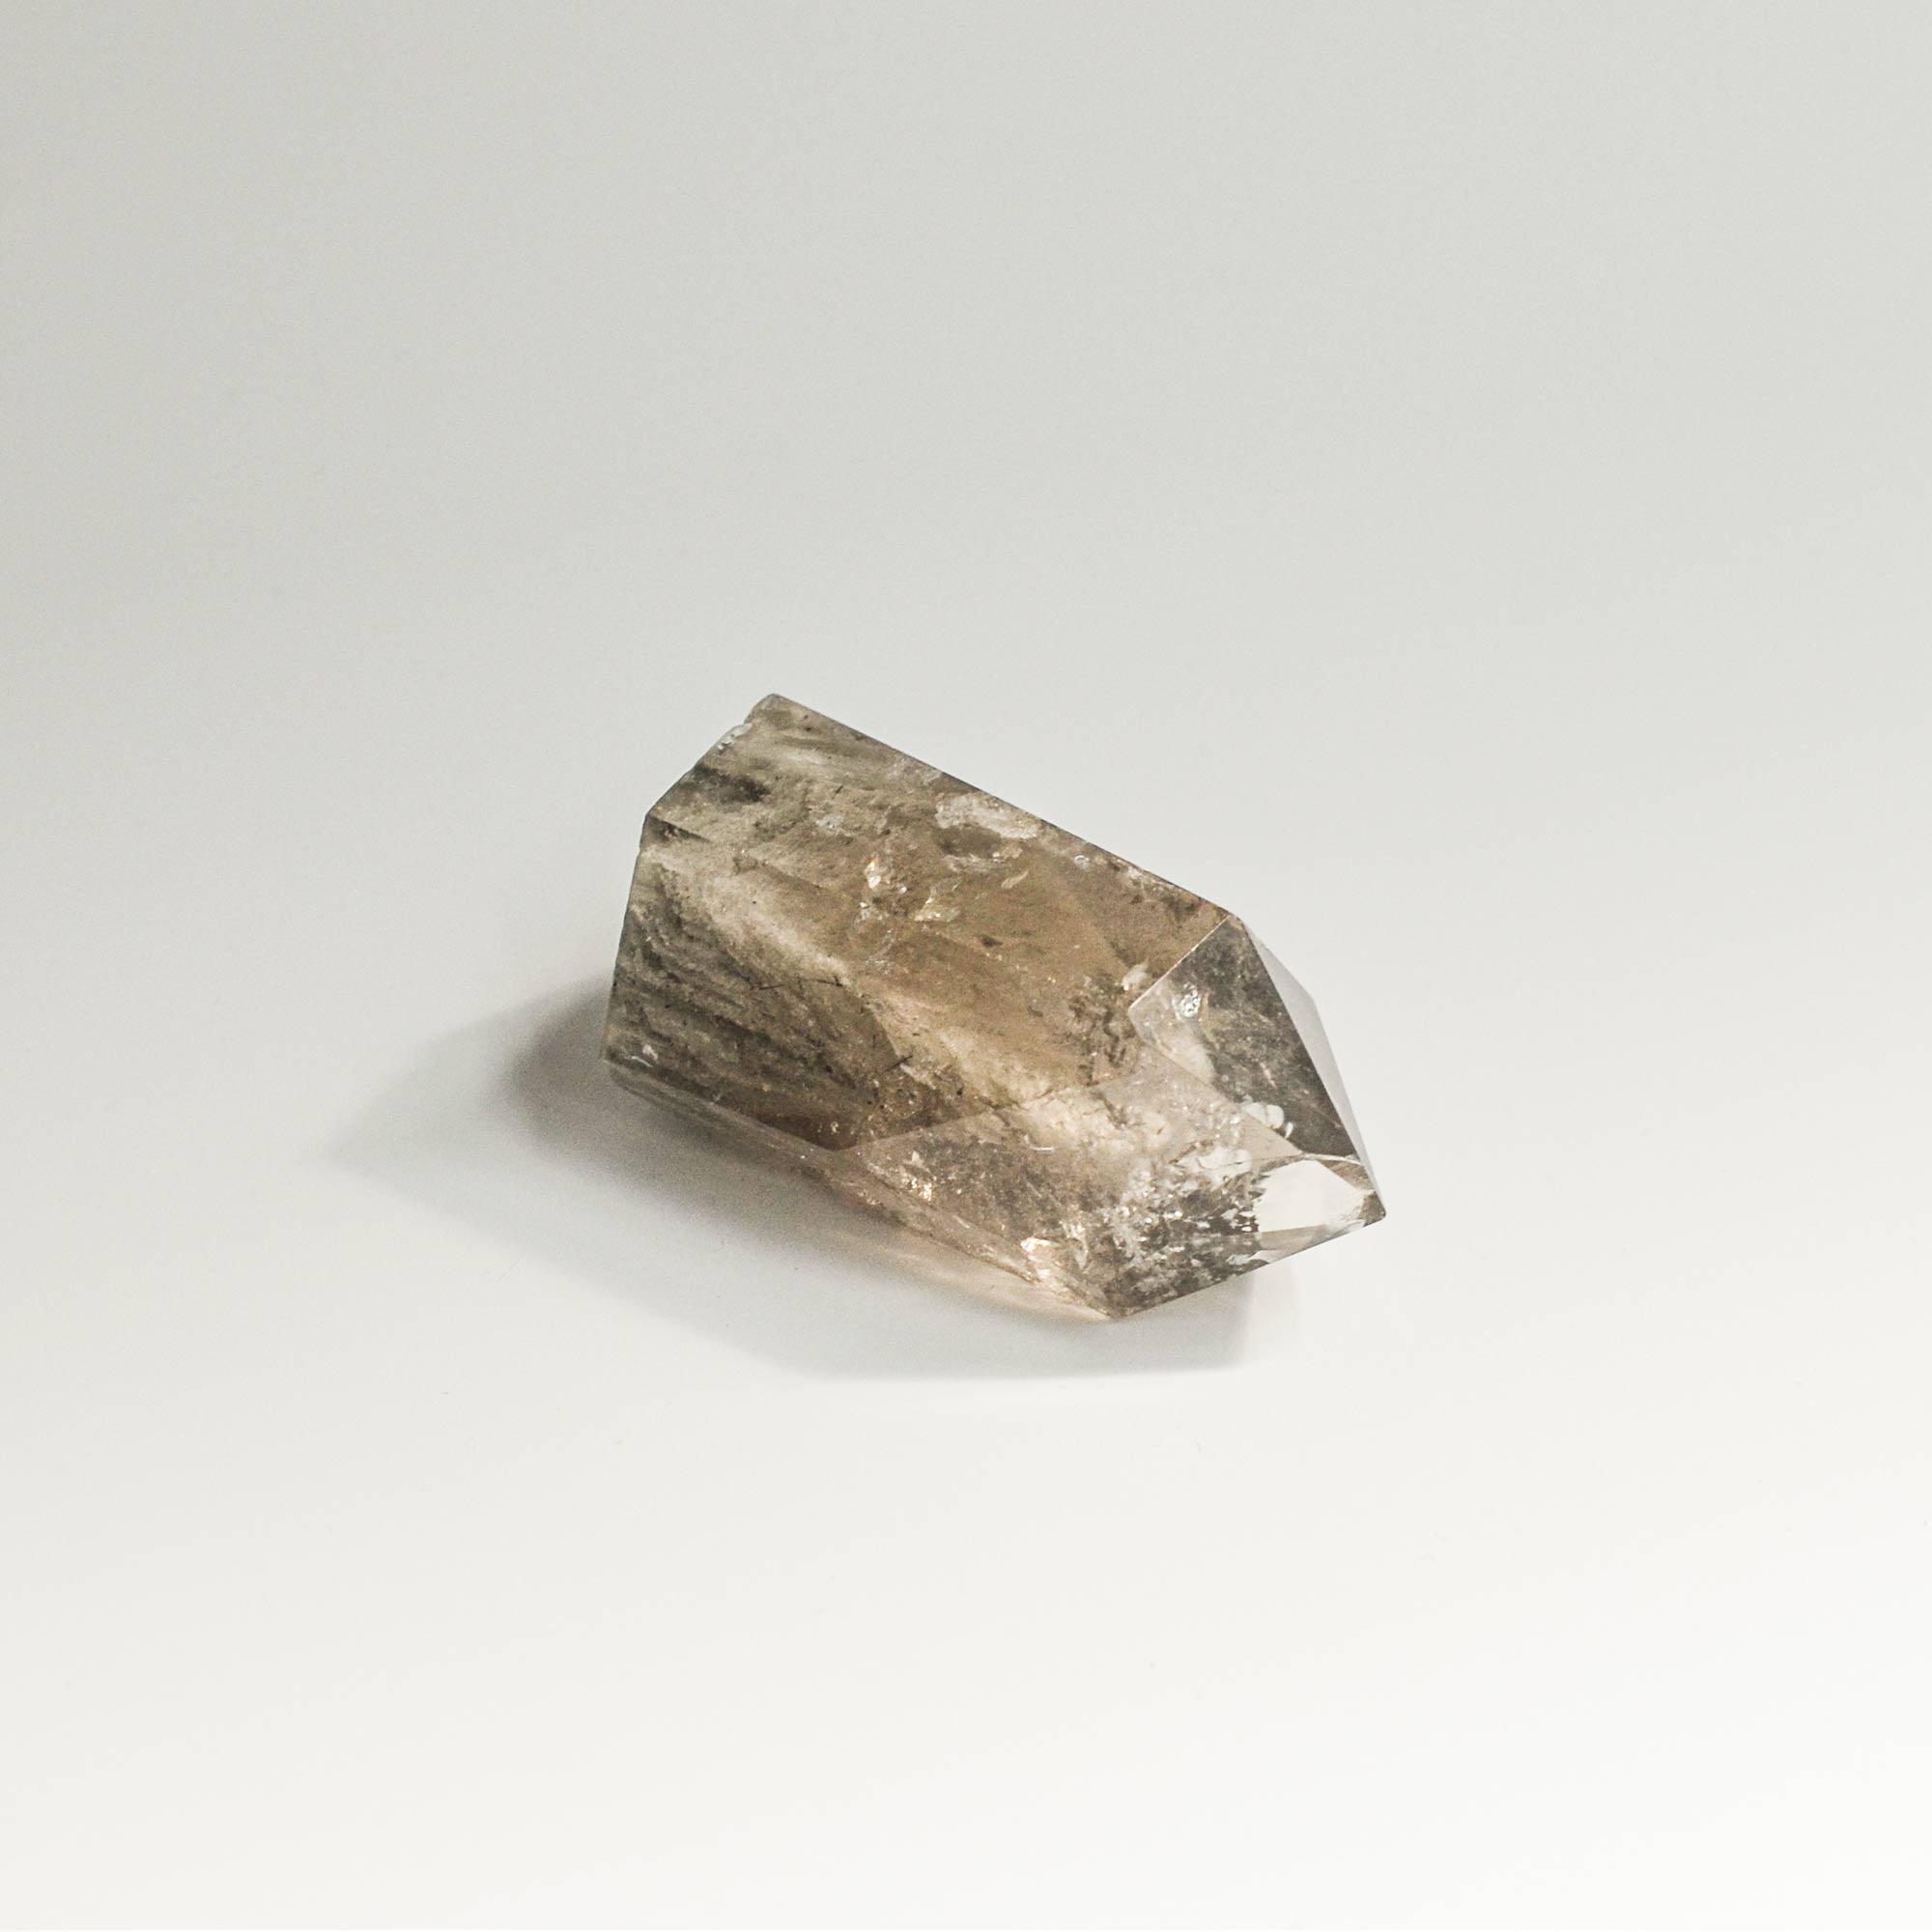 The top view of the phantom quartz crystal tower in grey